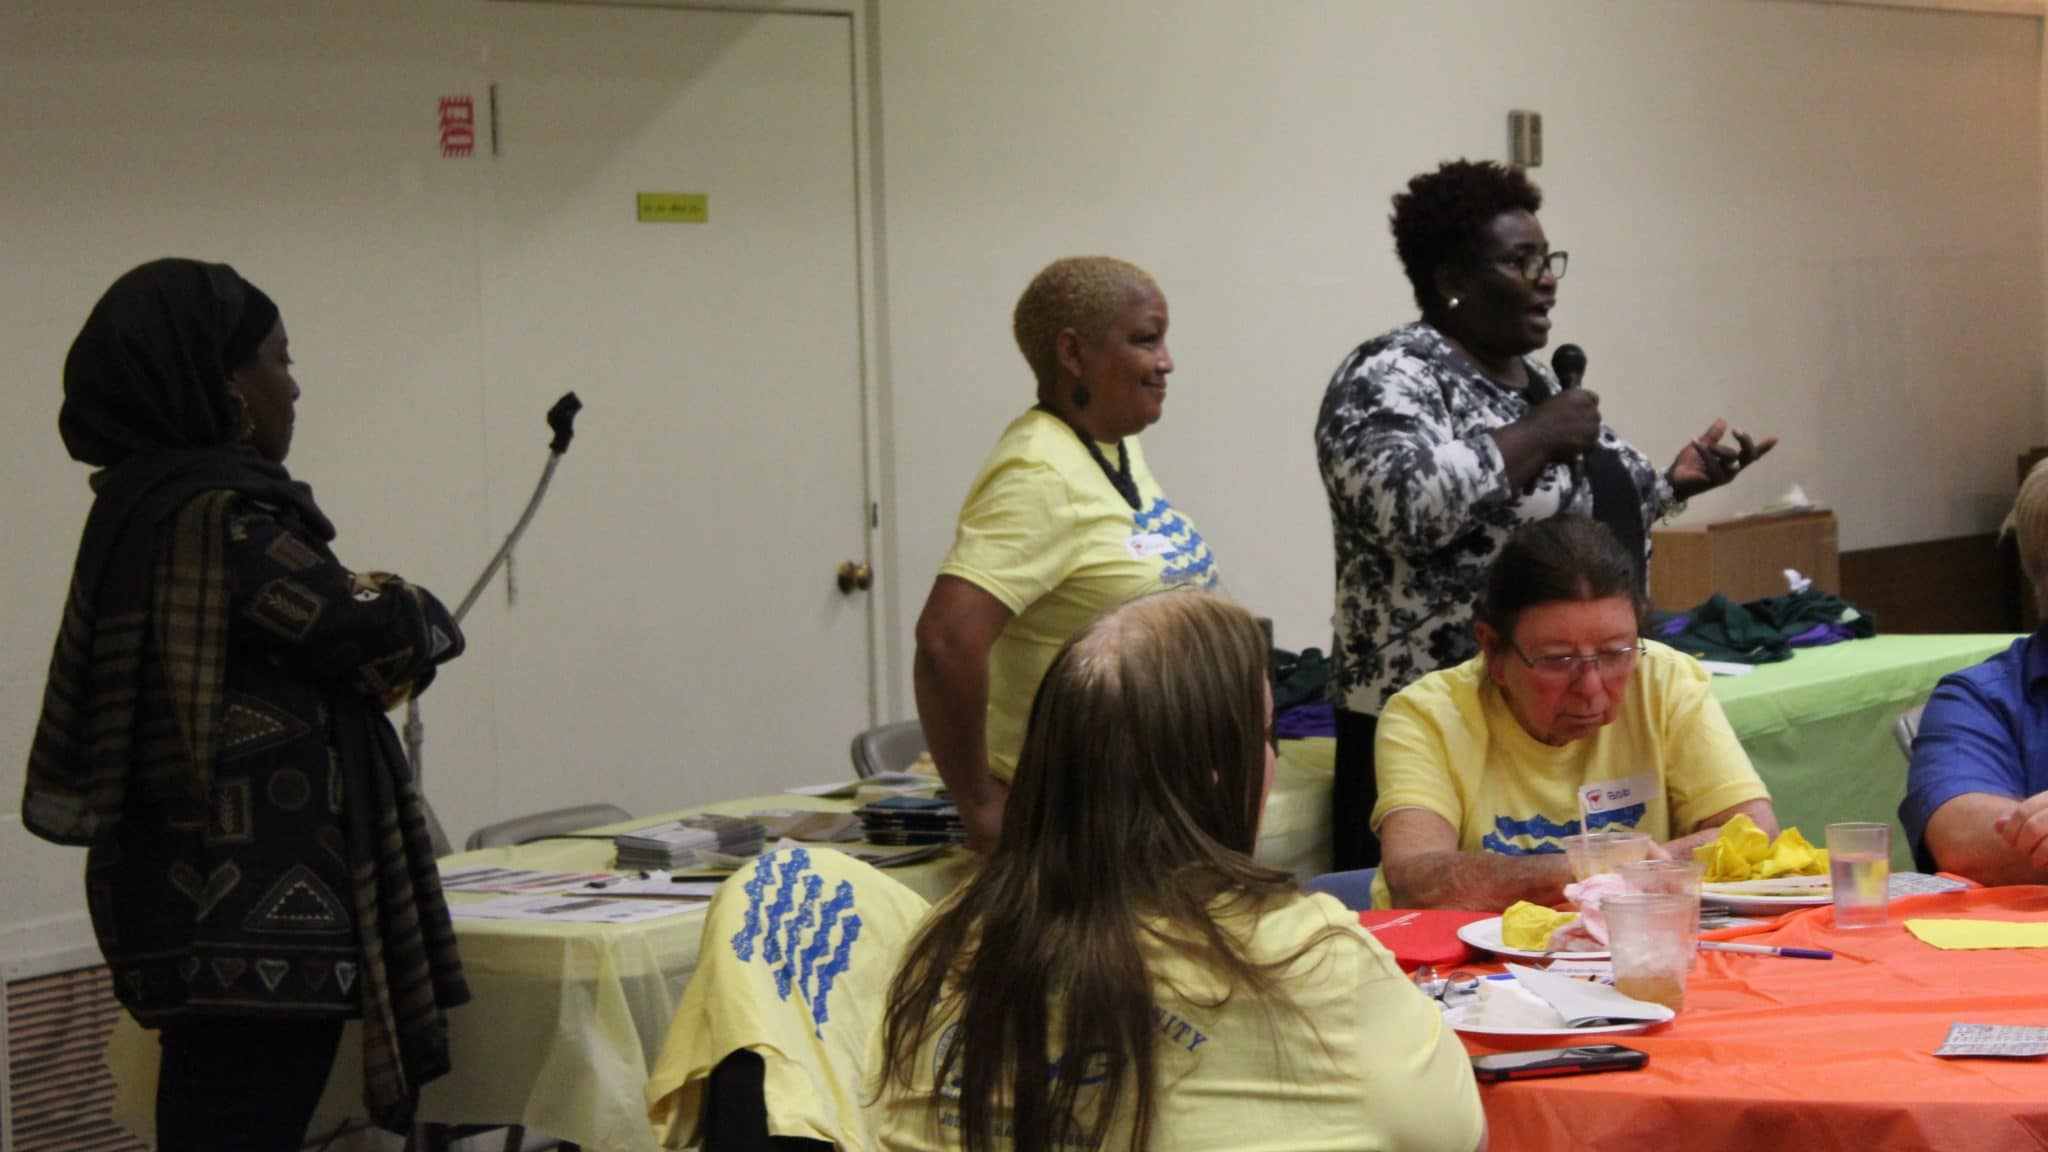 Sherri (far right) speaks about her experience as a homeowner during our community dinner in February 2020.